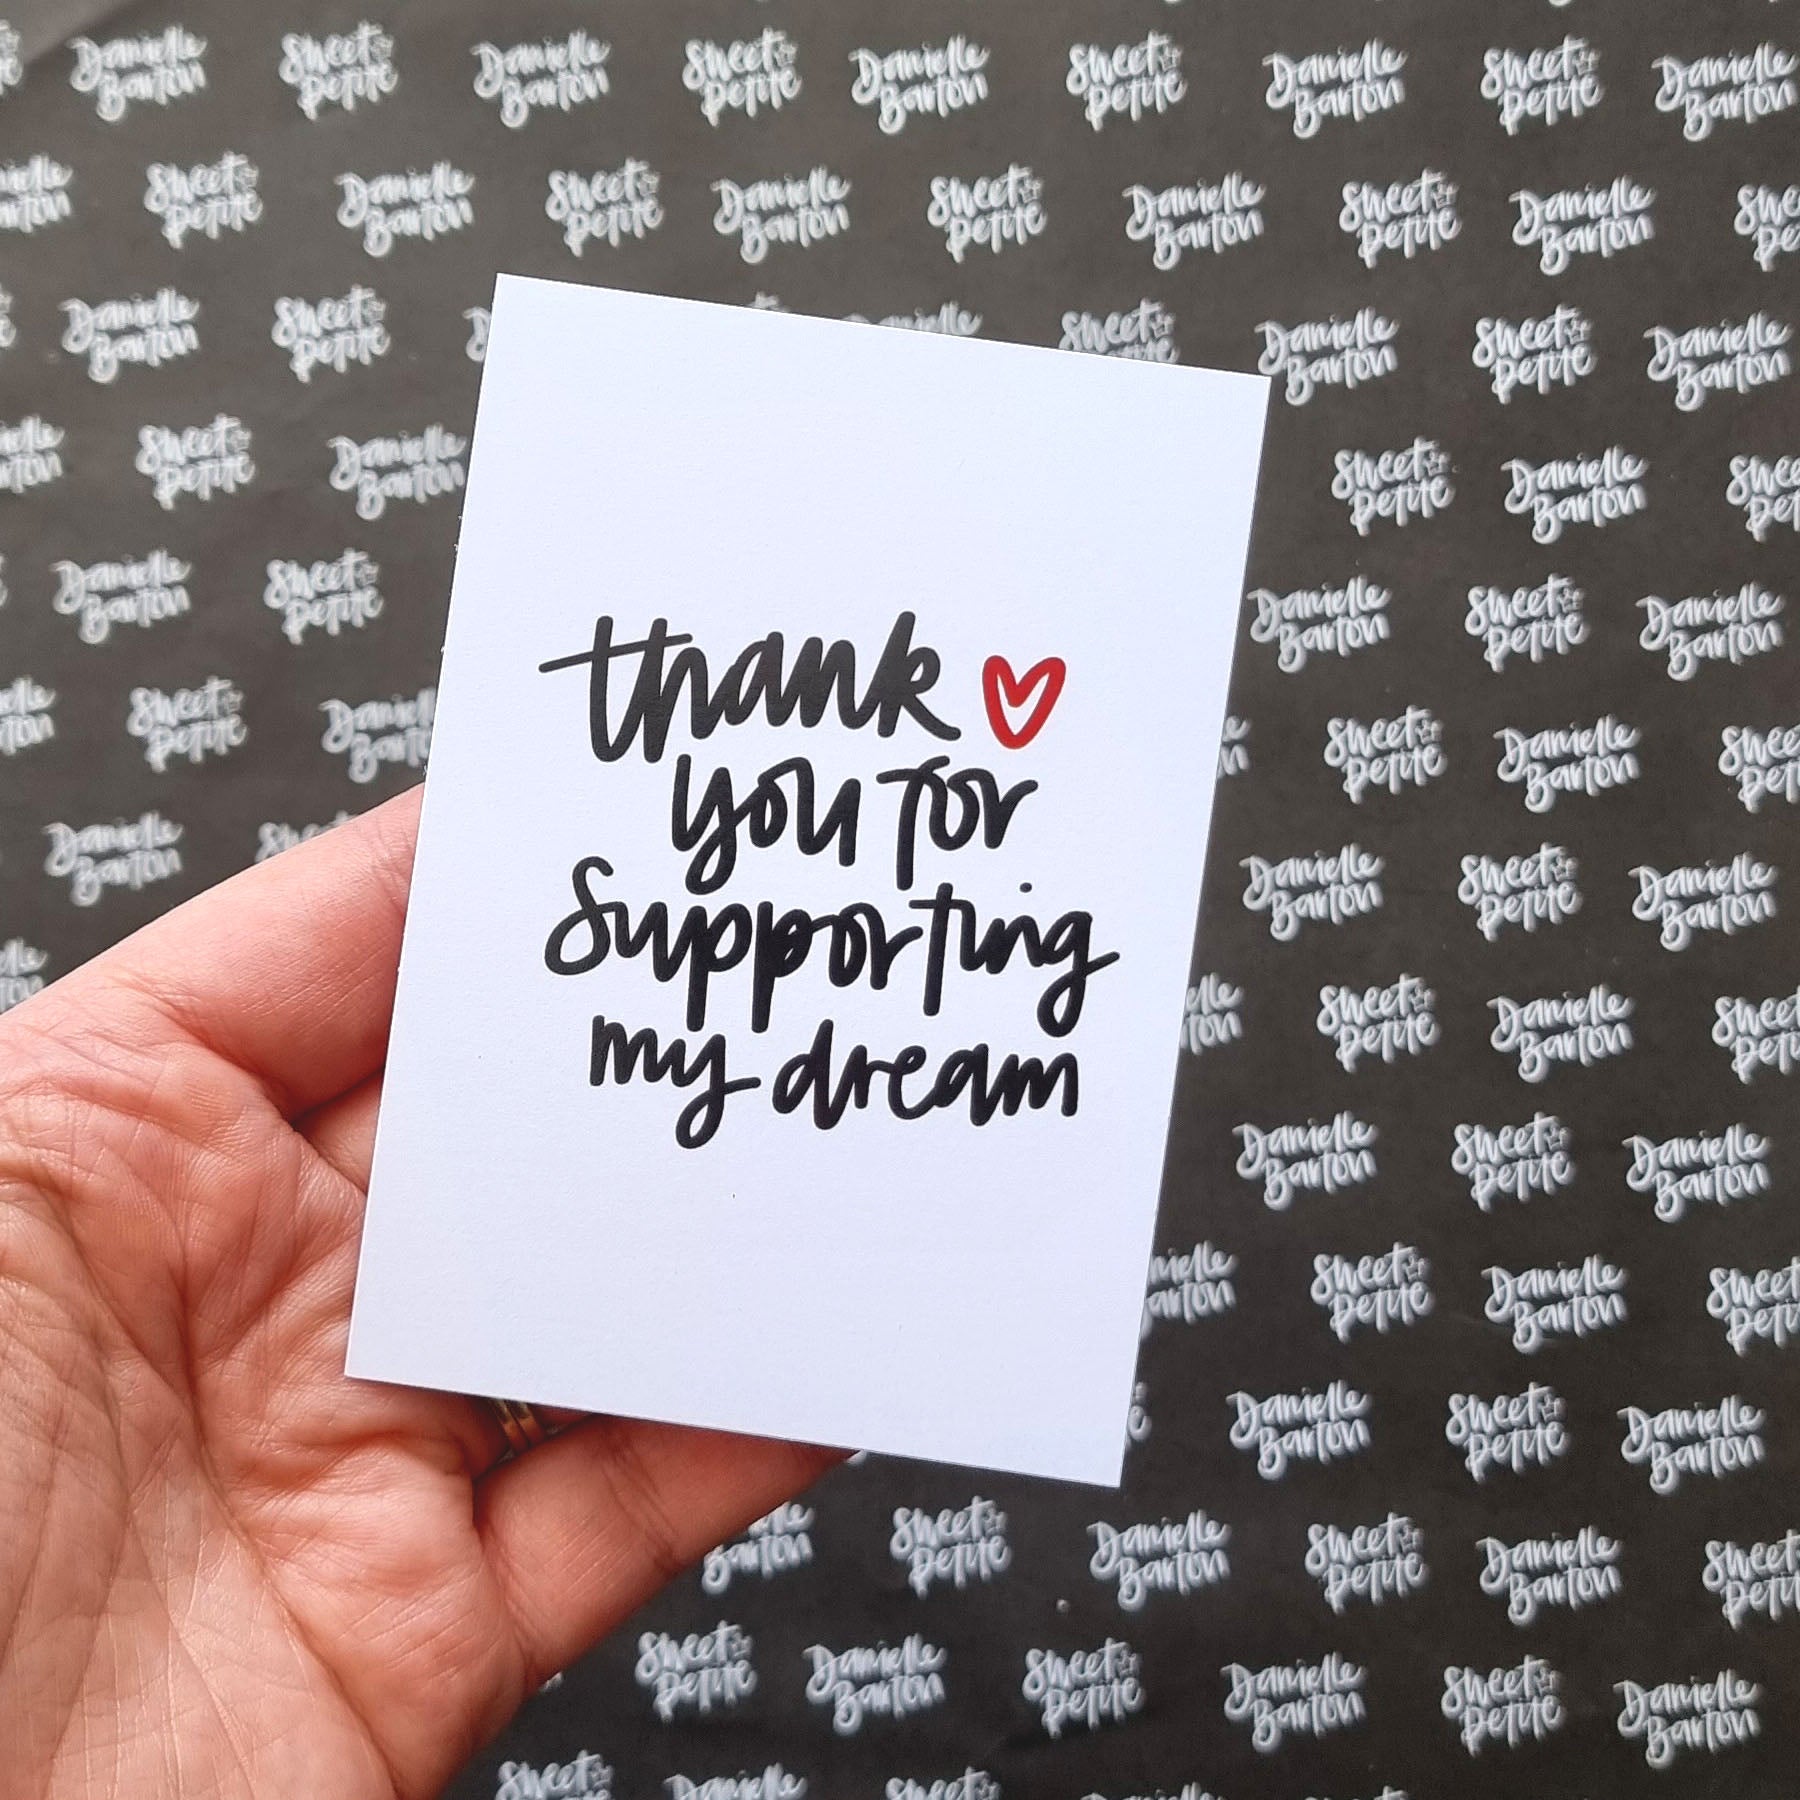 A7 Business Thank You Cards | Thank you for supporting my dream | by Sweet Petite